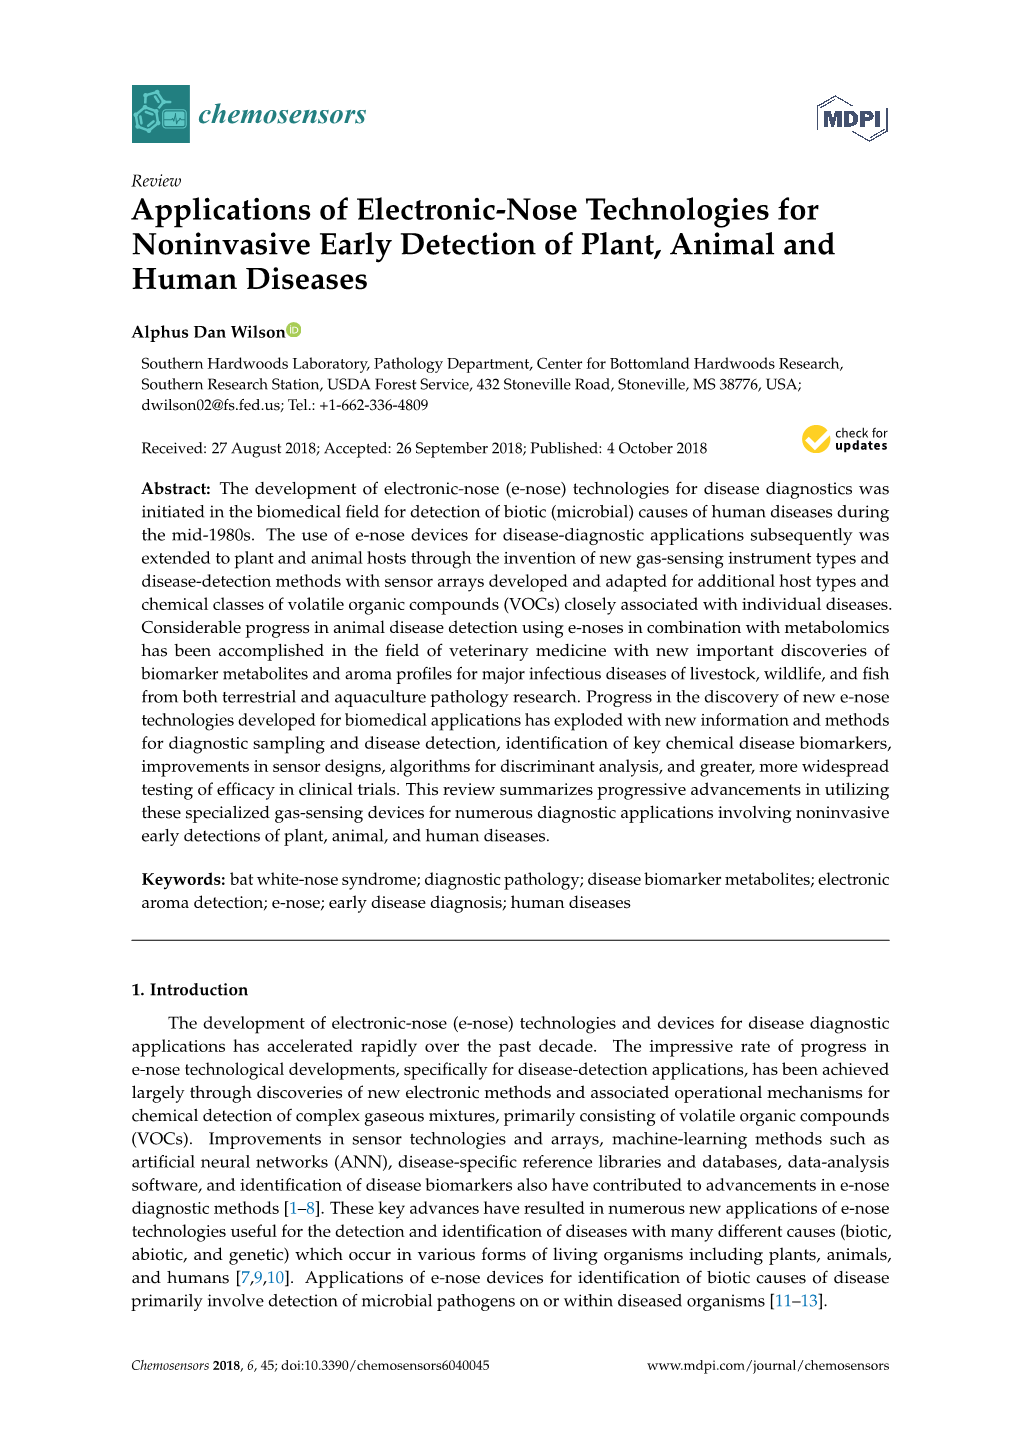 Applications of Electronic-Nose Technologies for Noninvasive Early Detection of Plant, Animal and Human Diseases